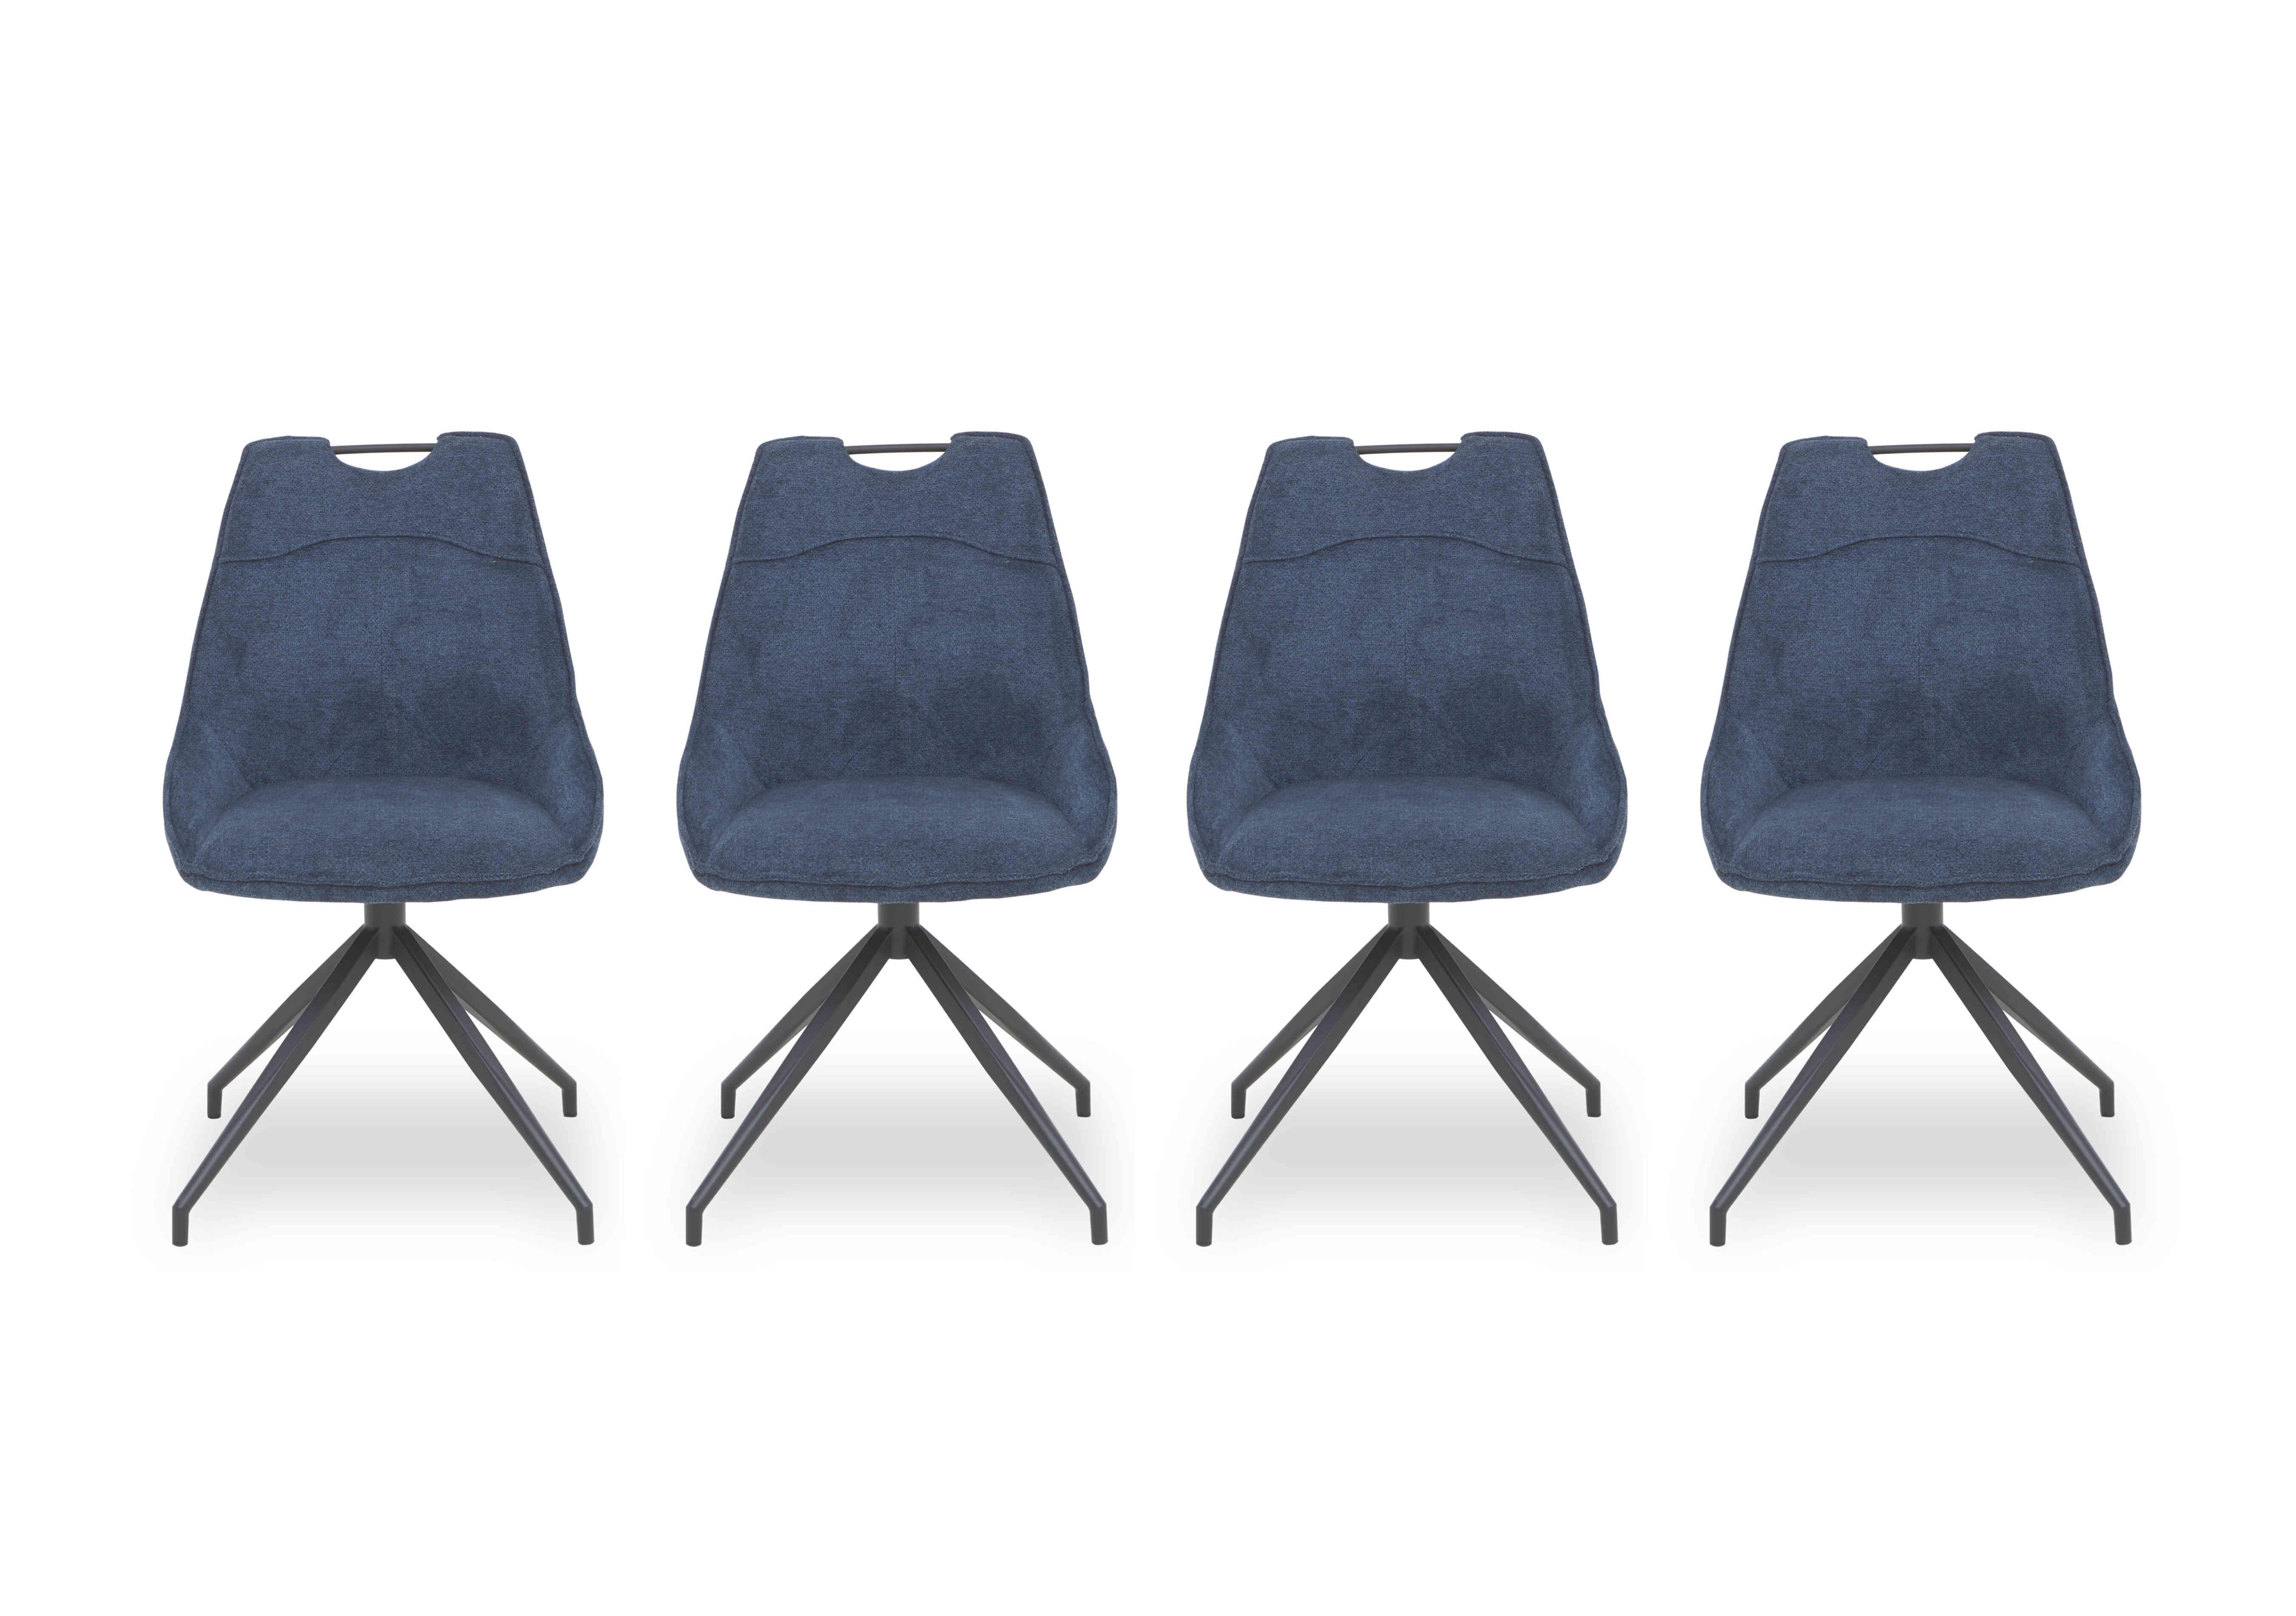 Pedro Set of 4 Fabric Swivel Dining Chairs in Blue on Furniture Village